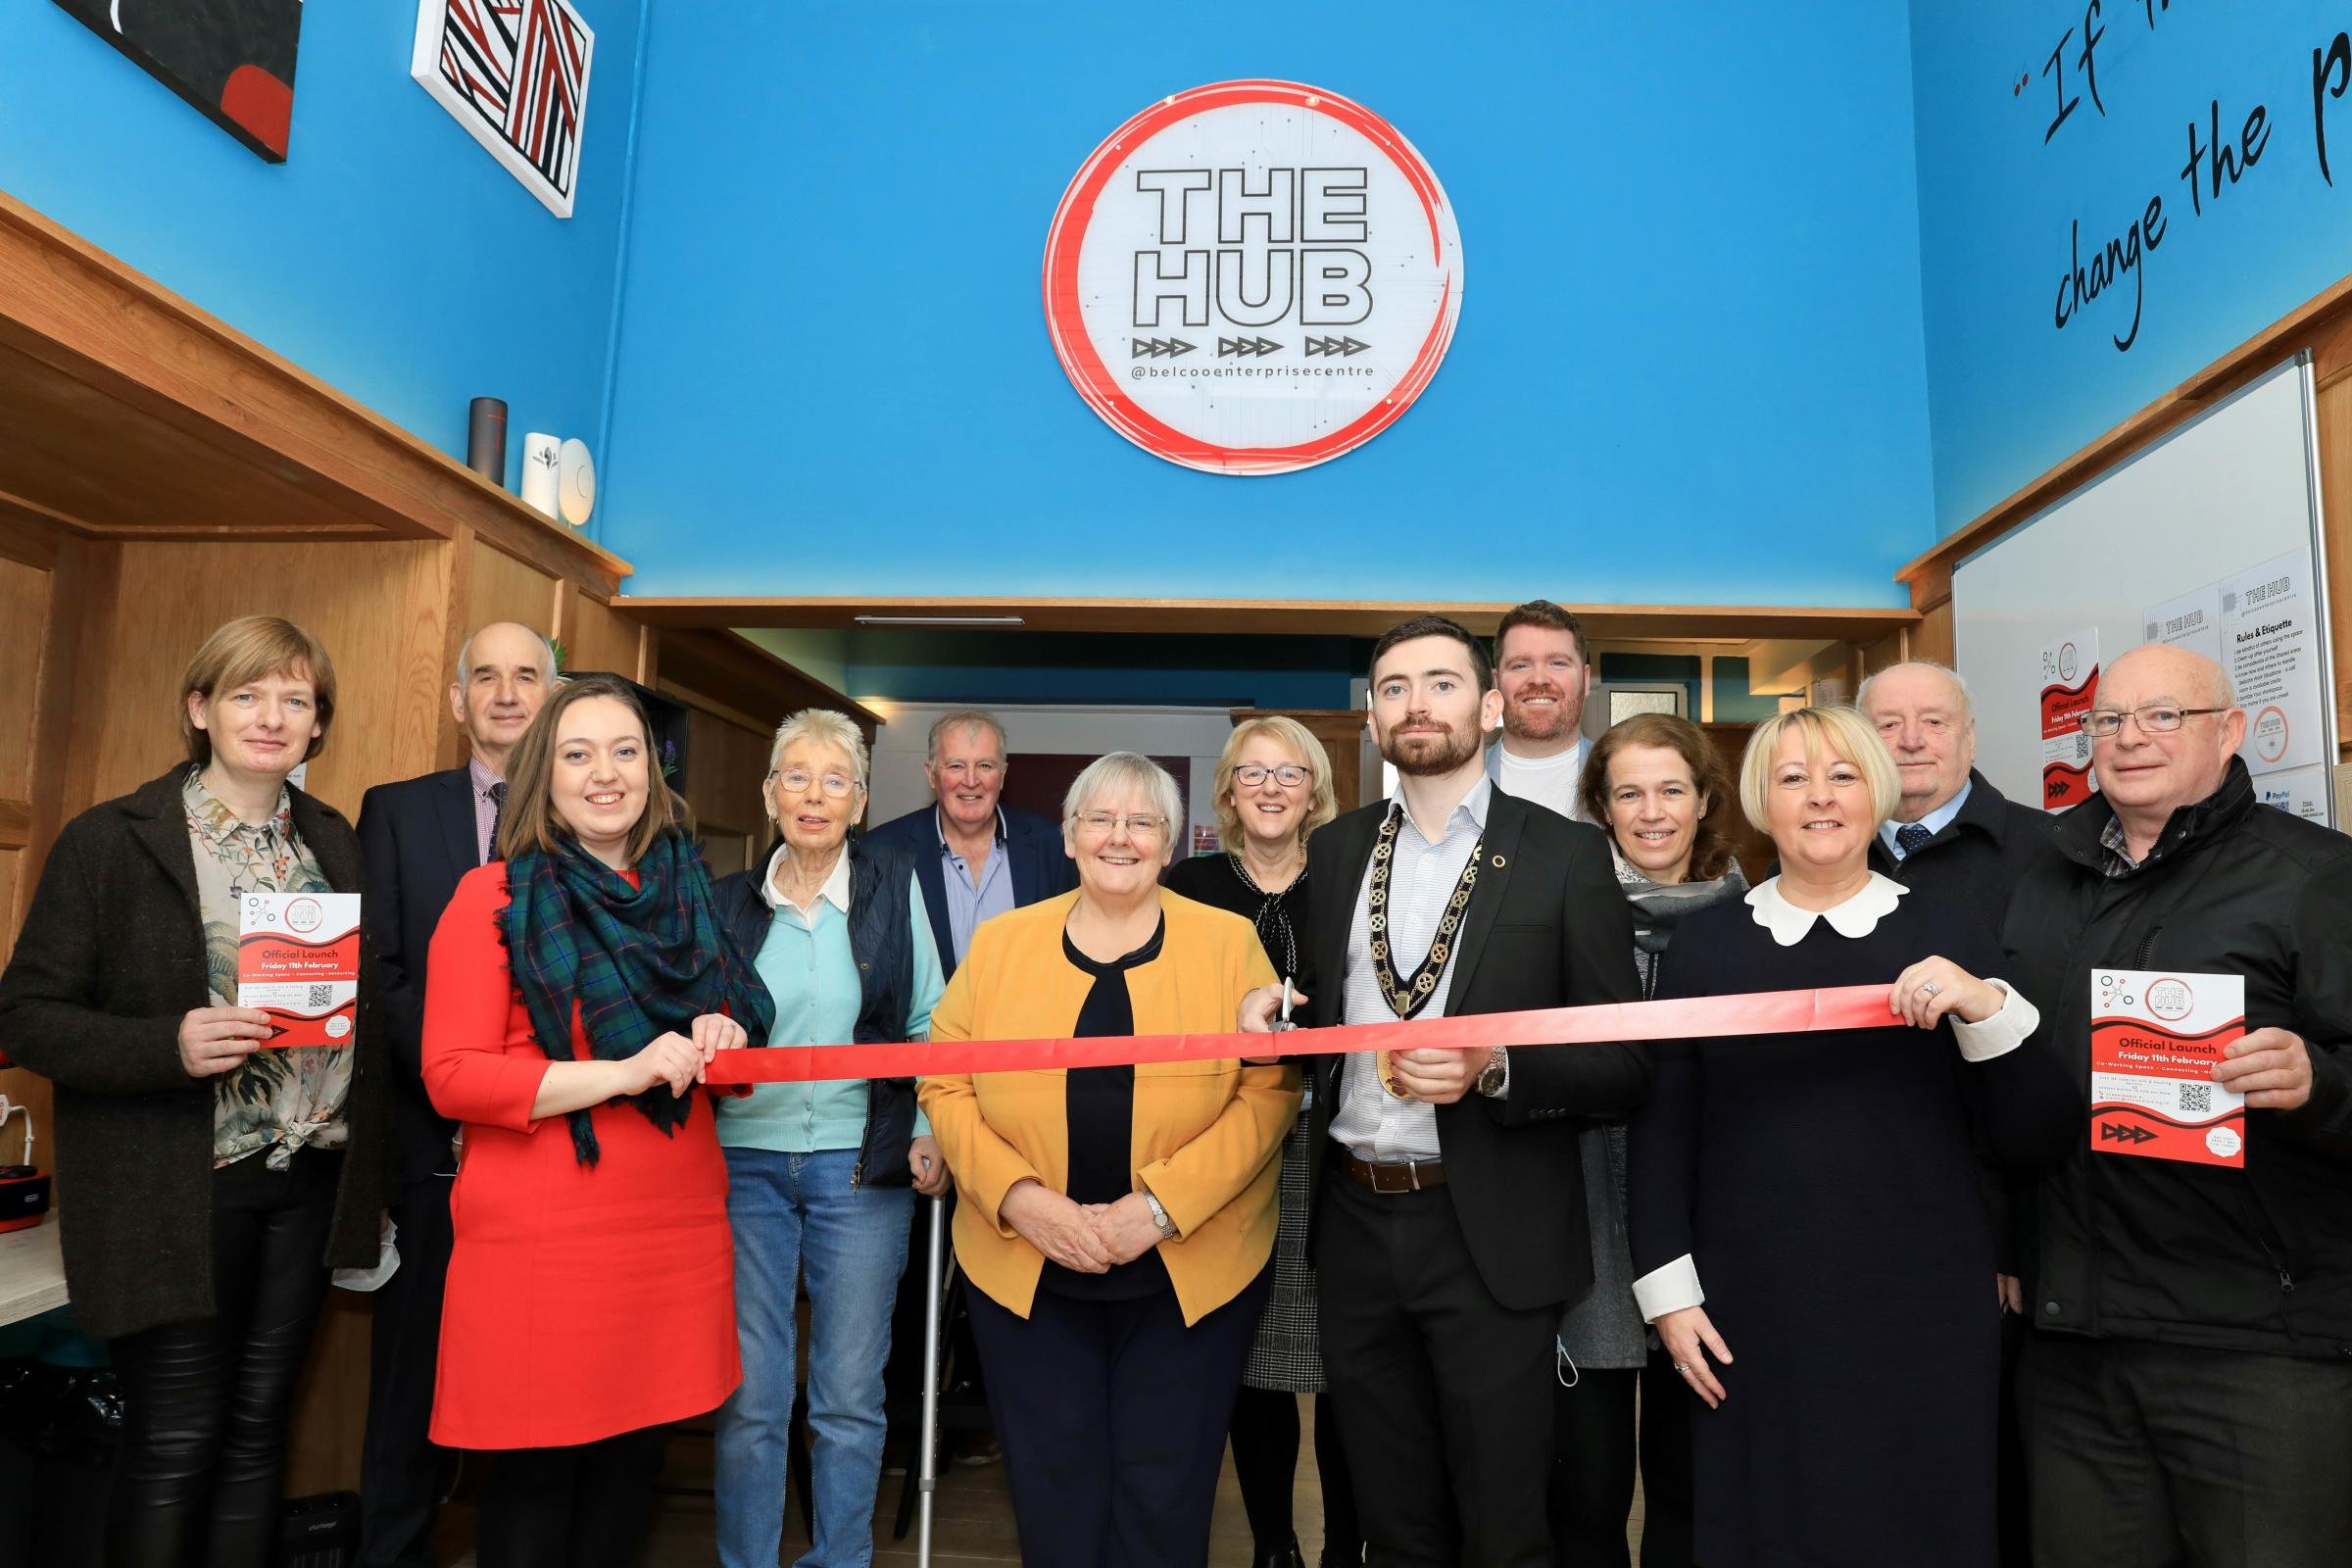 MLA &amp; Local Councillors visit the Official Launch of The Hub @belcooenterprisecentre